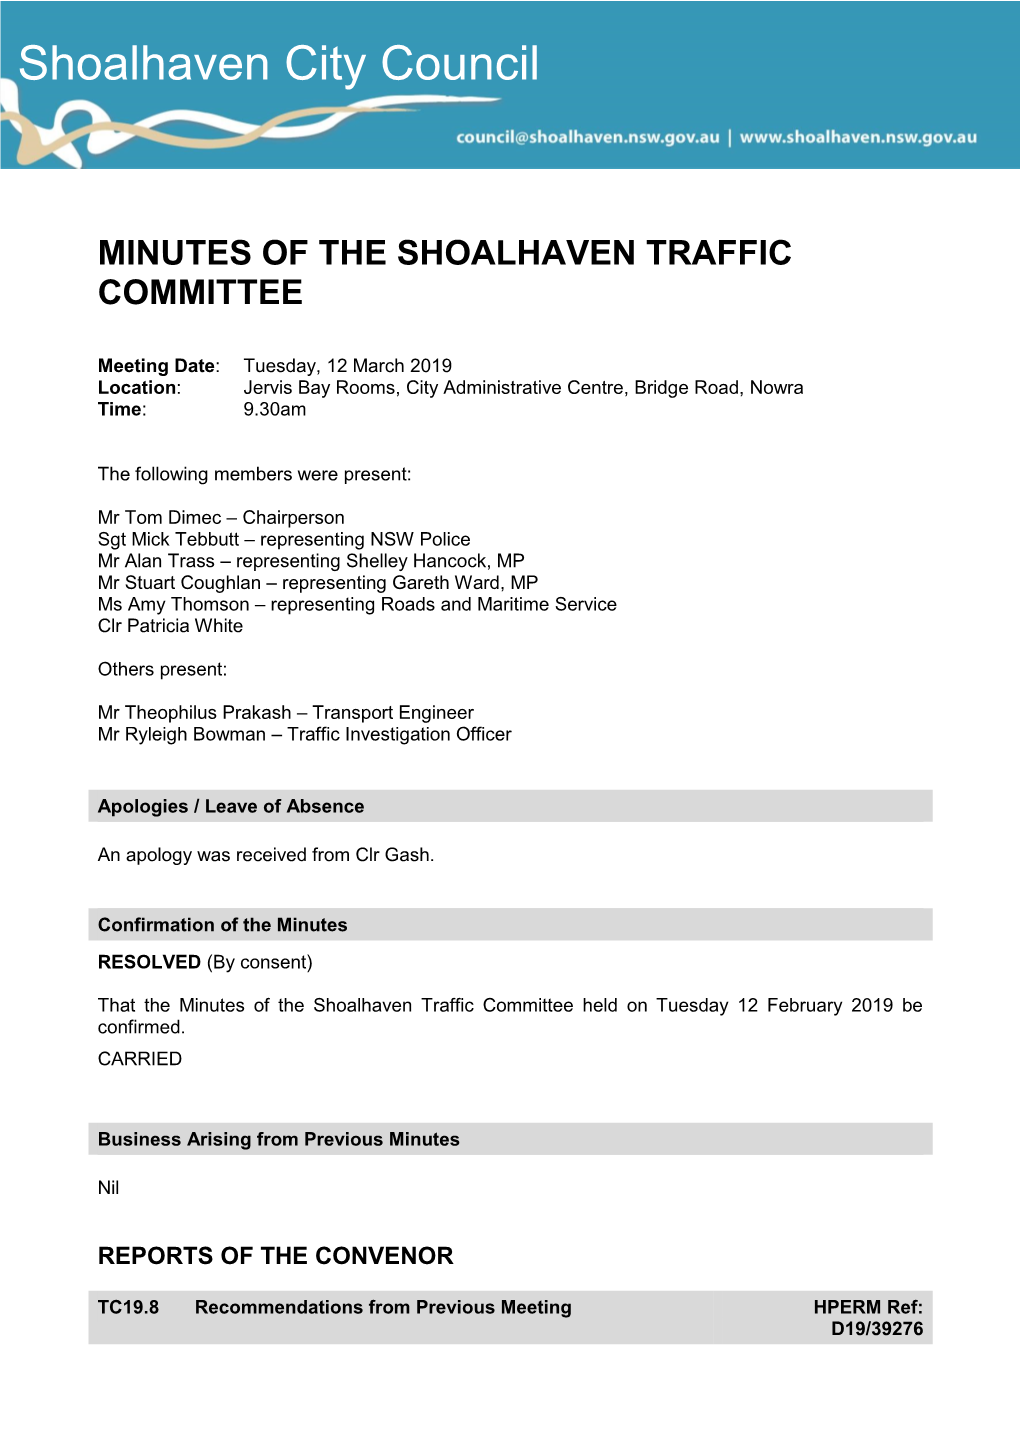 Minutes of Shoalhaven Traffic Committee